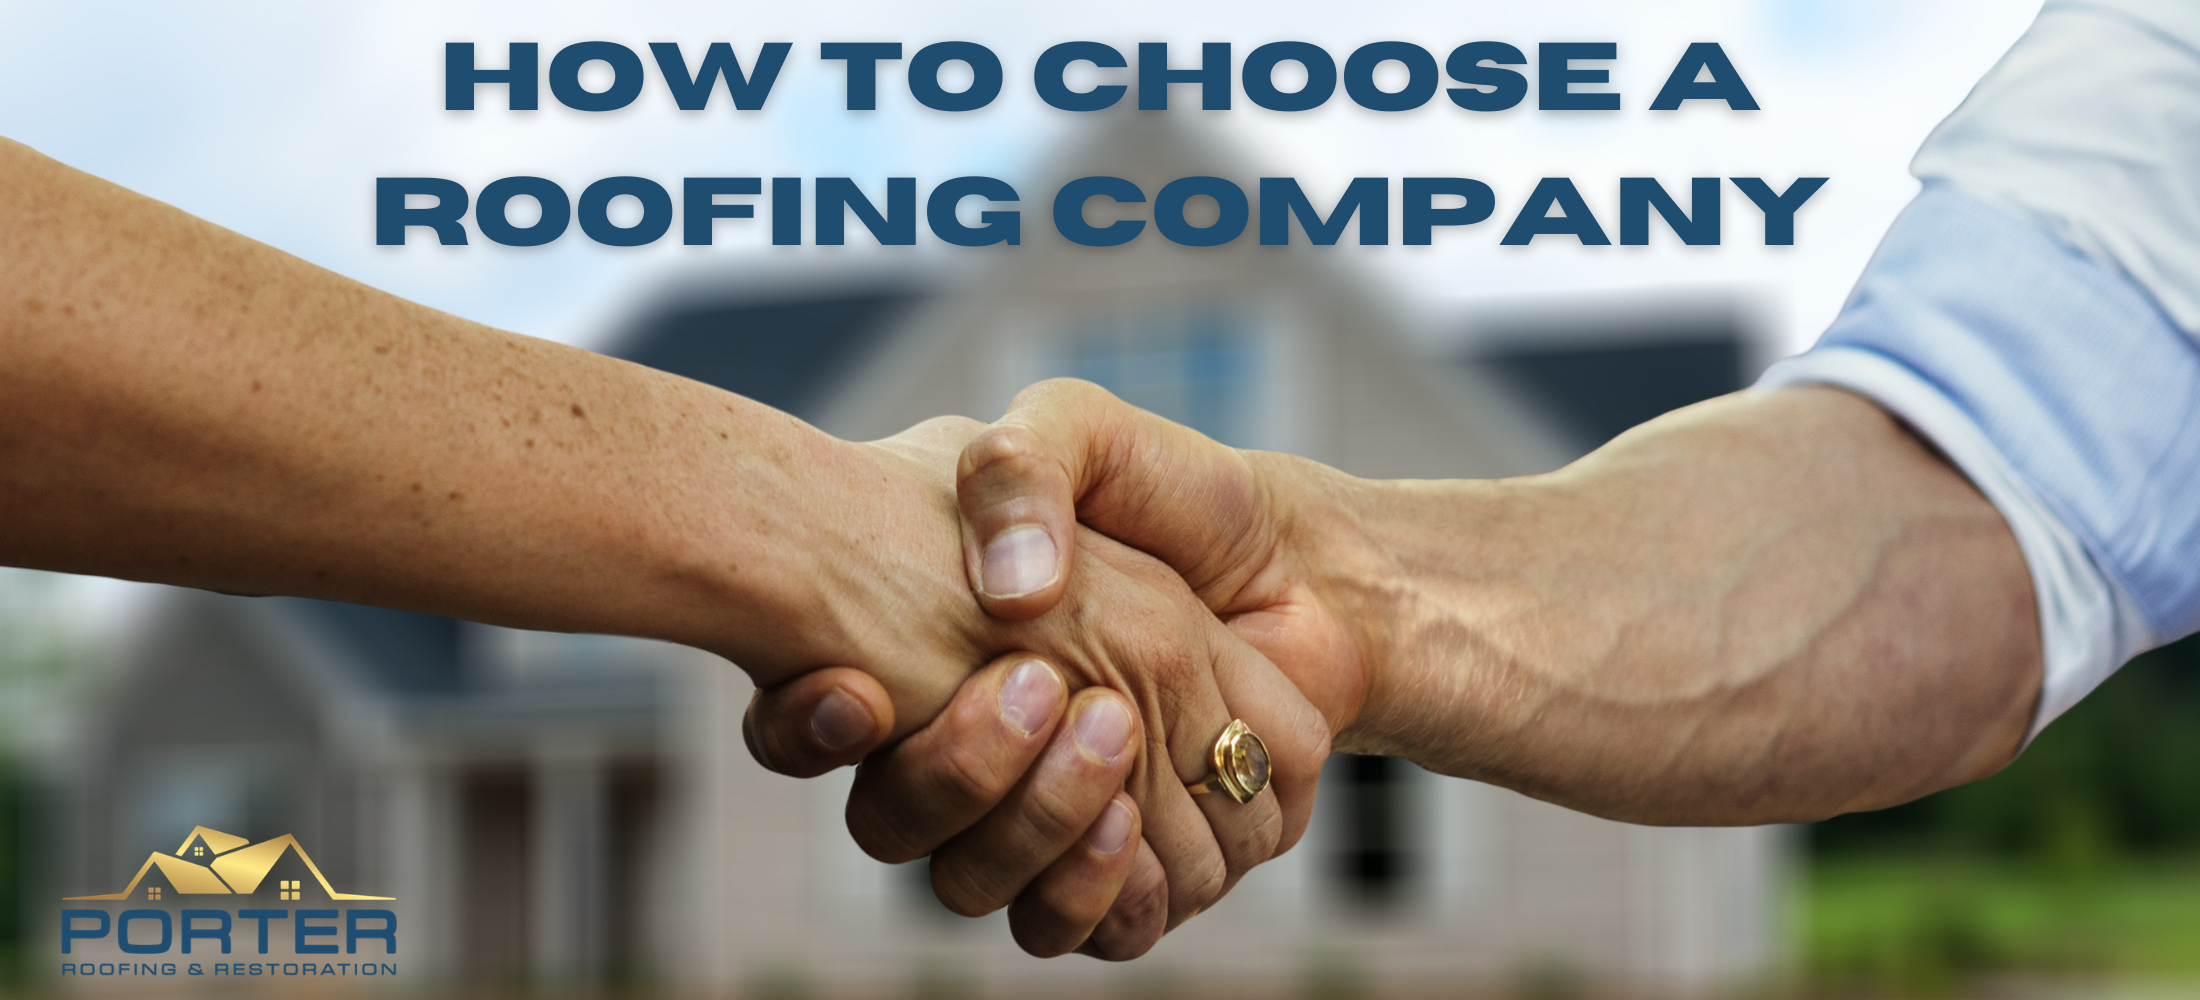 How to Choose the Right Roofing Company